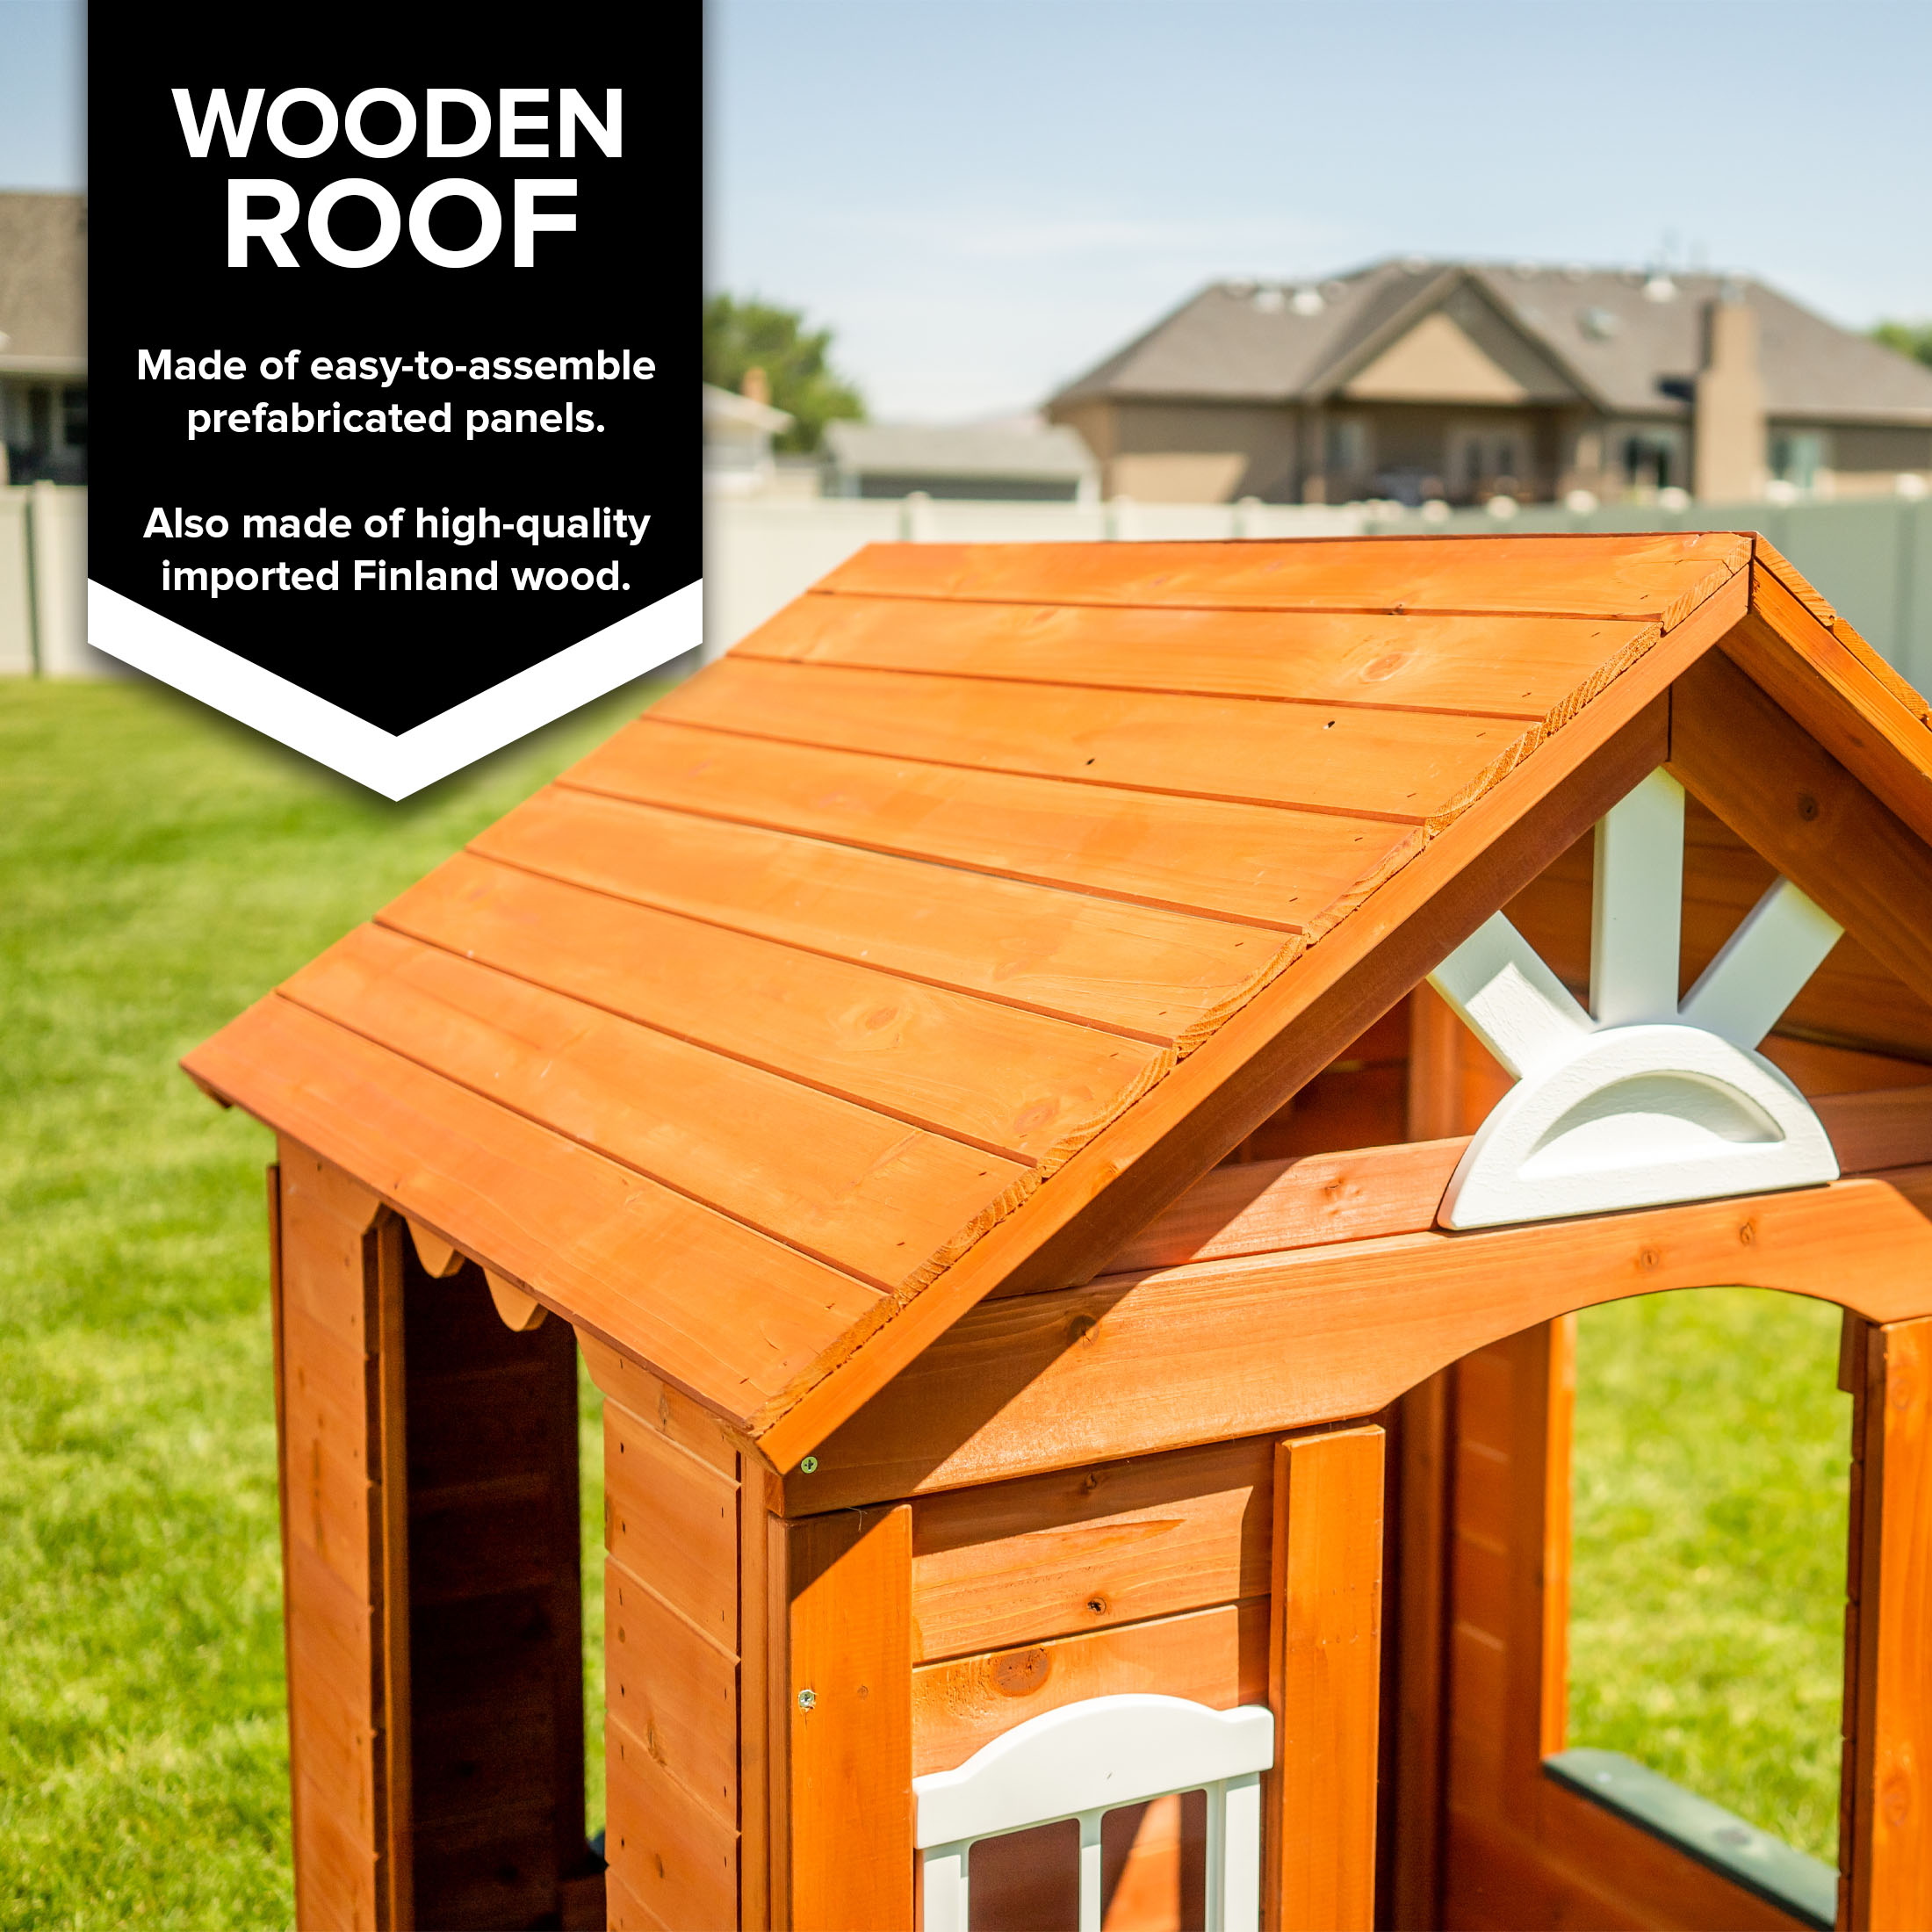 Sportspower Bellevue Kids Wooden Playhouse with Fun Colored Working Front Door, White Trim Windows, and Flower Pot Holders - image 9 of 13